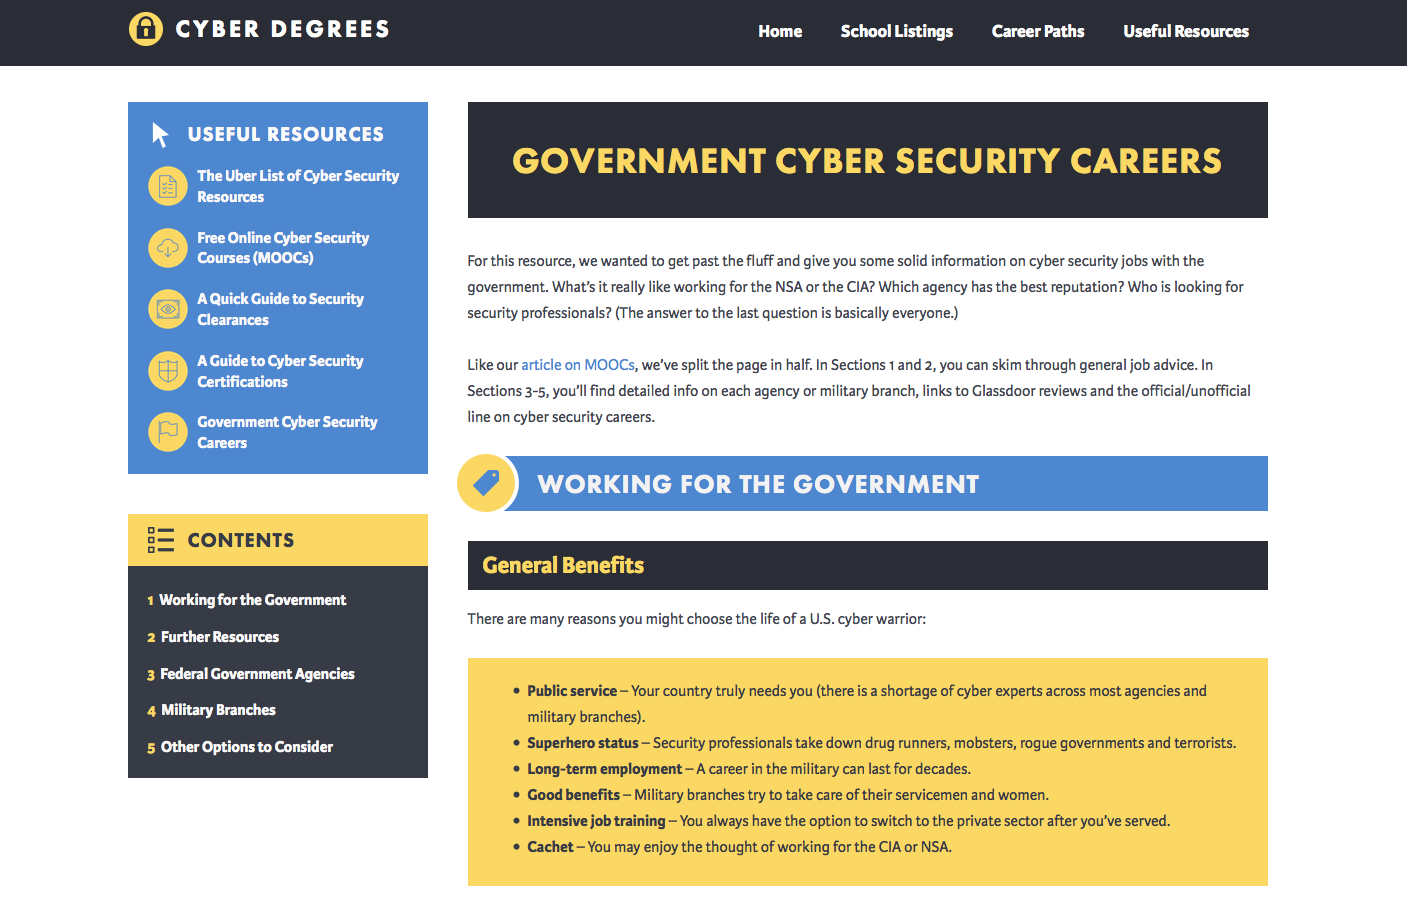 Cyber Security - Government Career